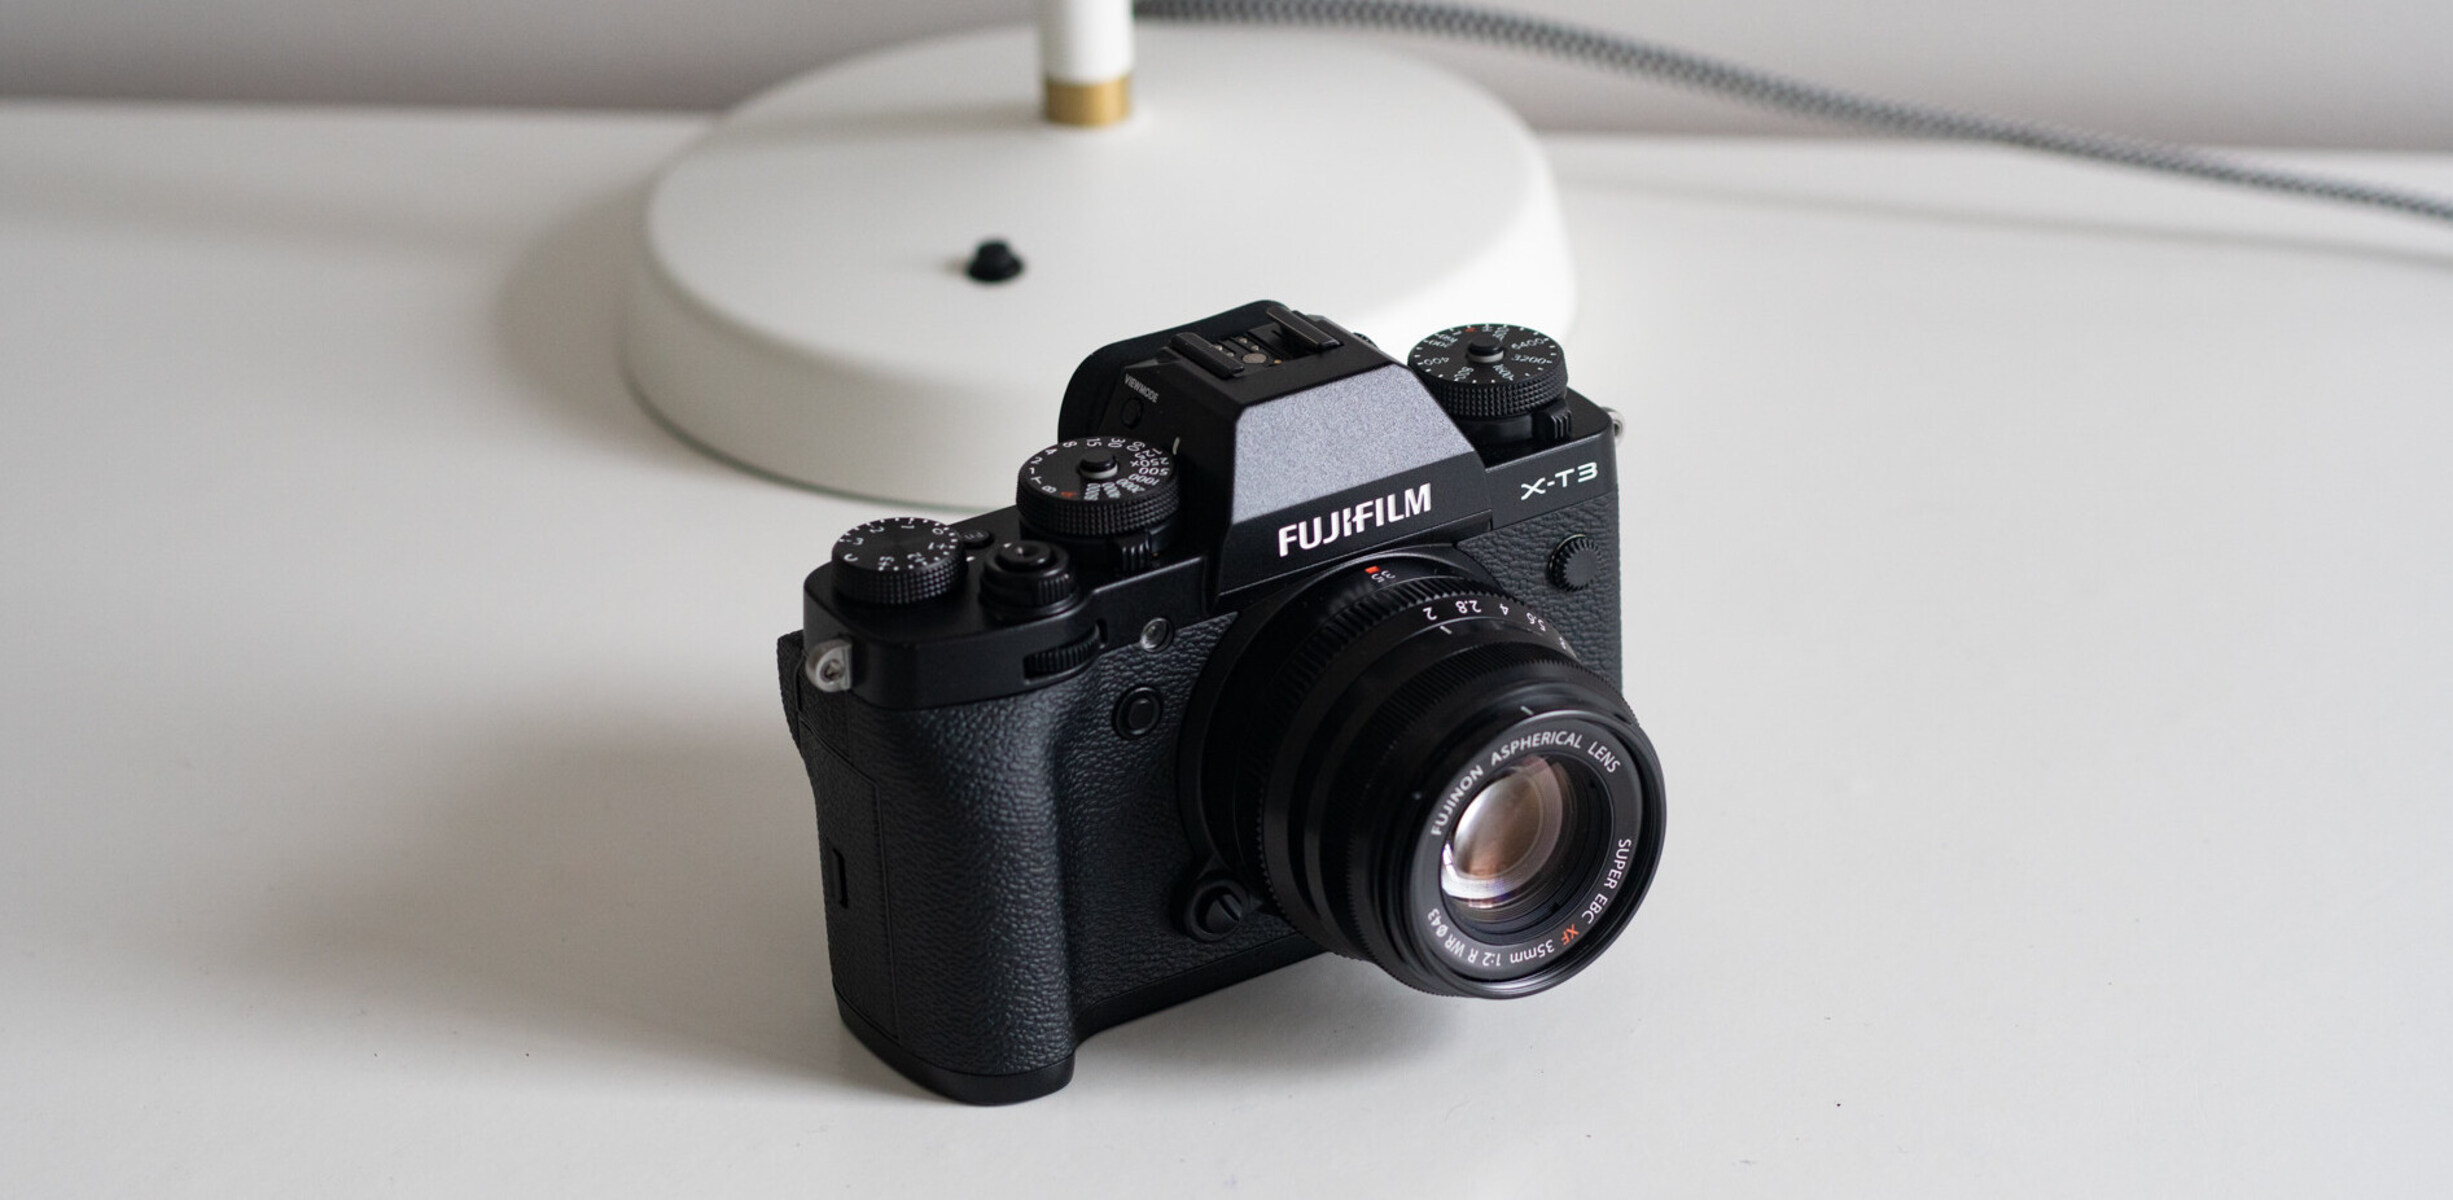 How To Protect A Mirrorless Camera Without A Case